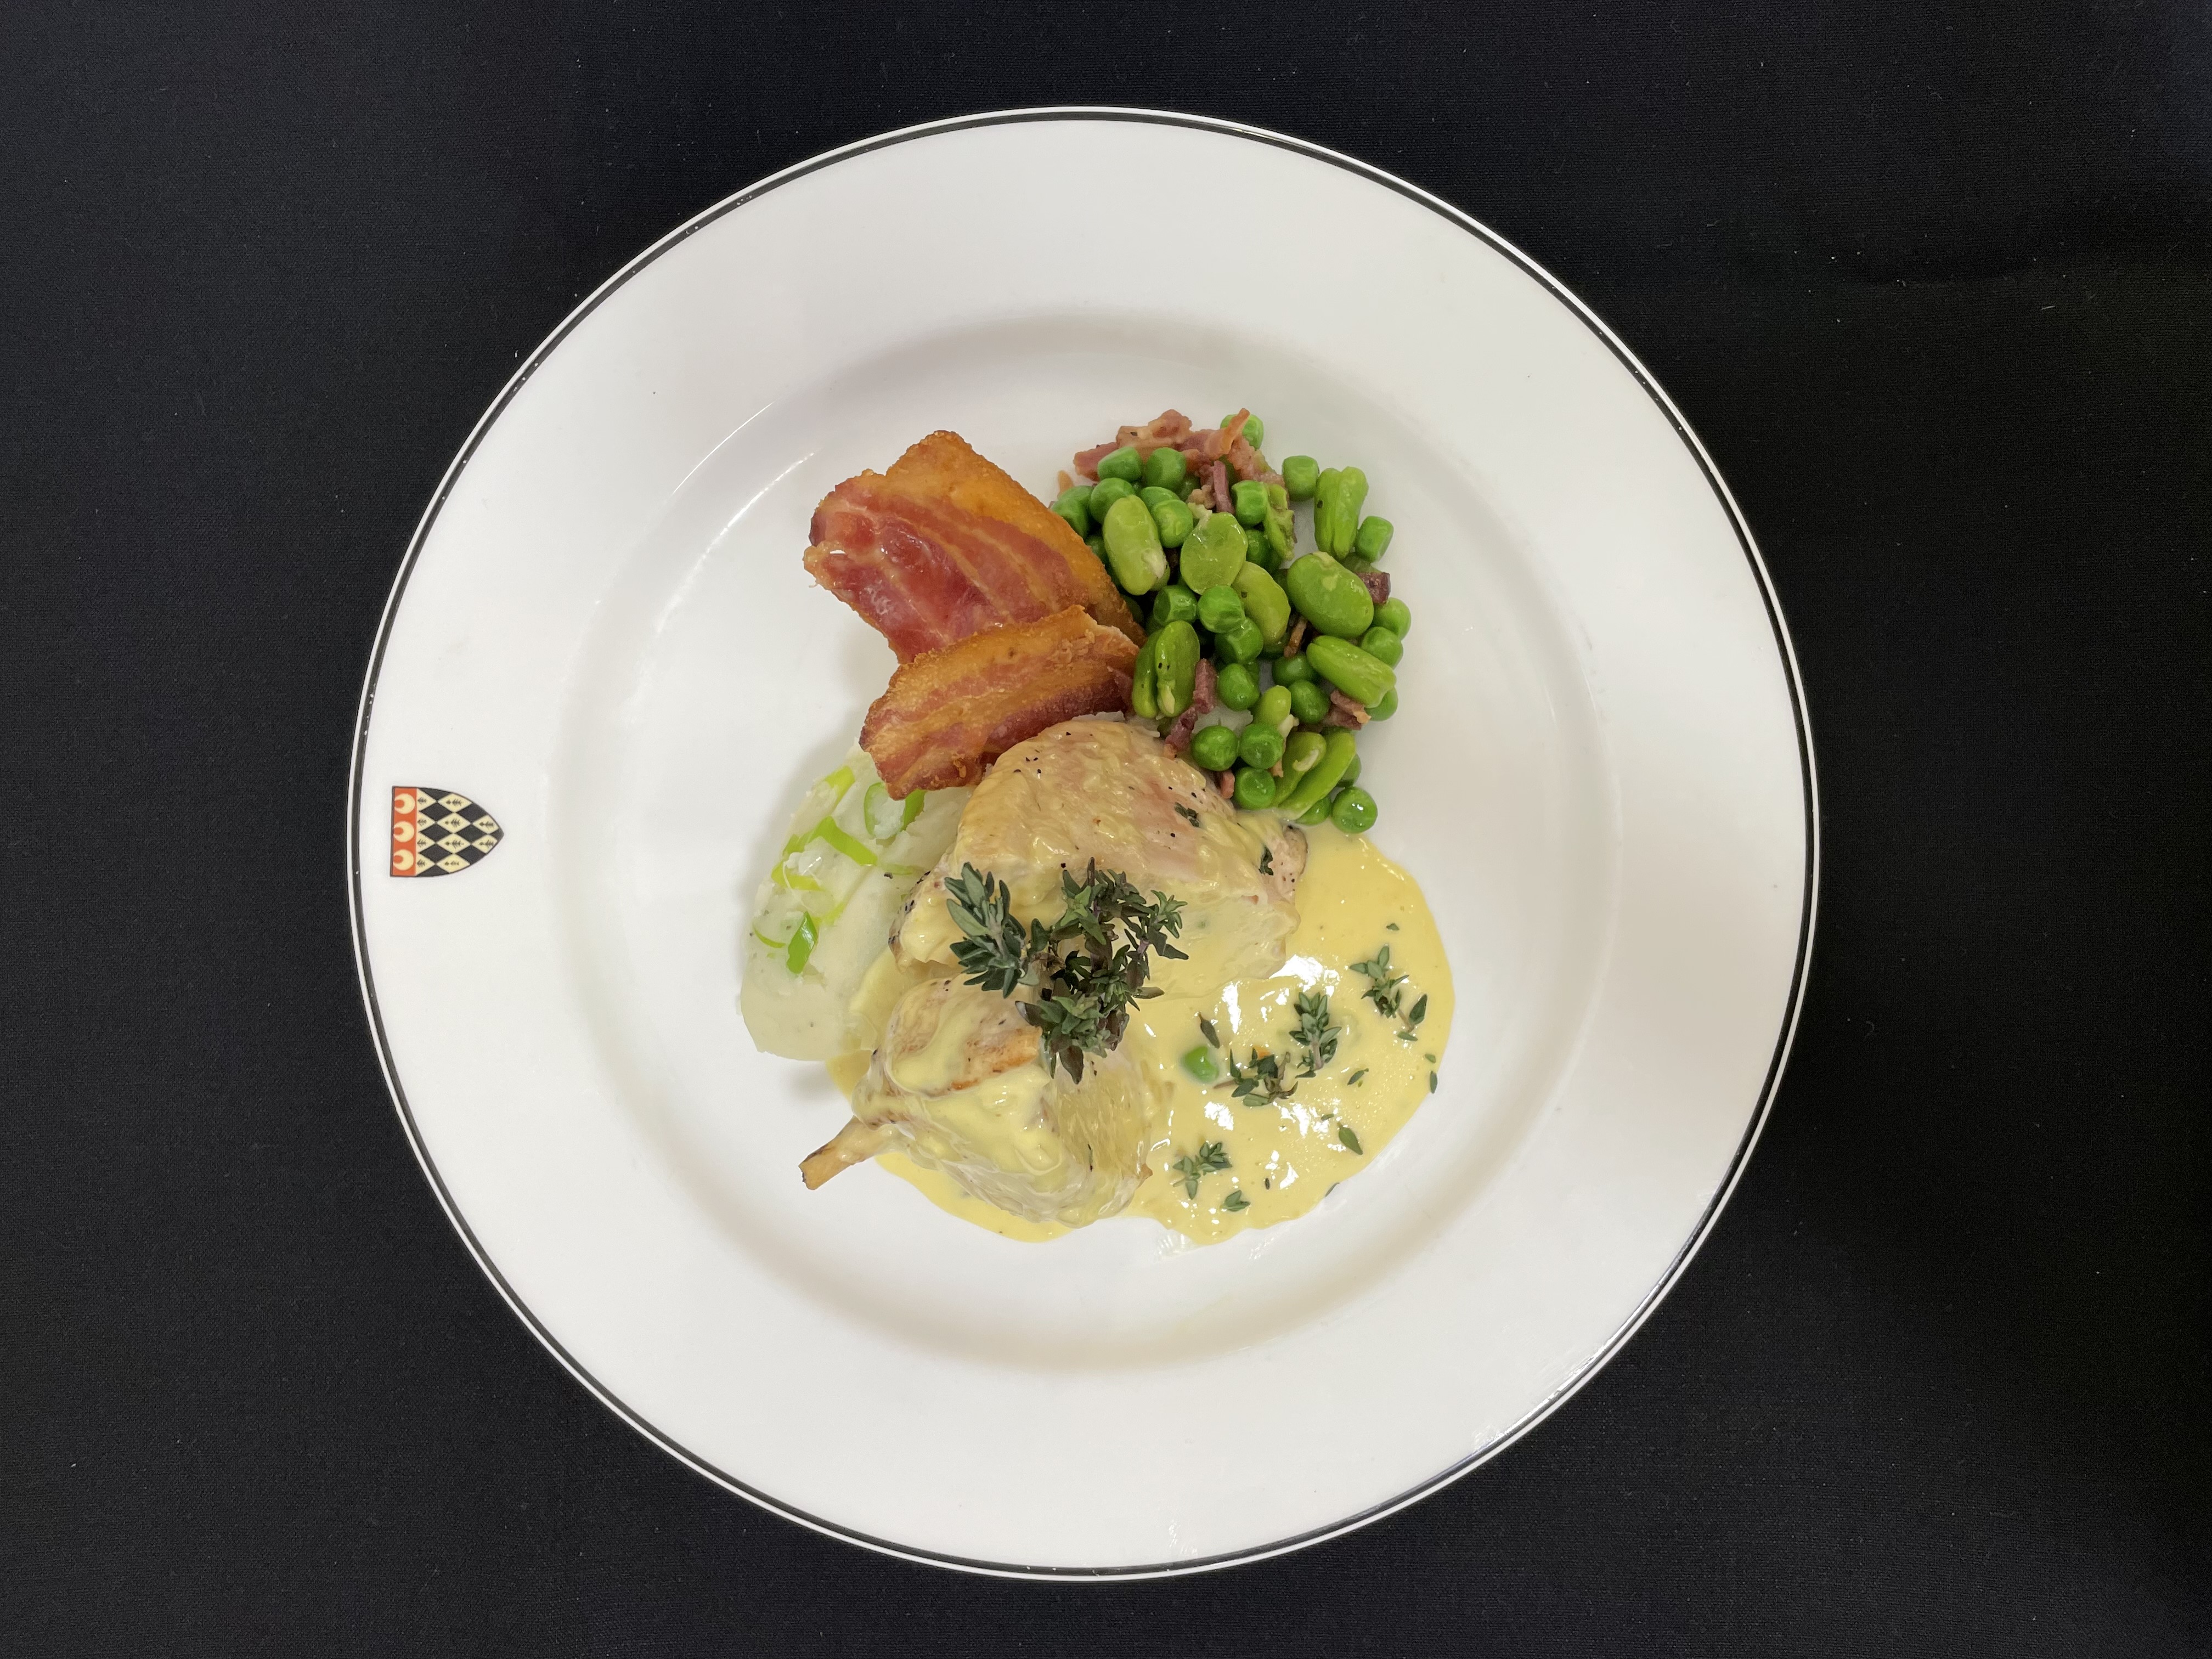 British chicken suprème: served with a leek and mushroom mousse, spring onion mash, peas, broad beans, Gloucester old spot bacon and beurre blanc sauce